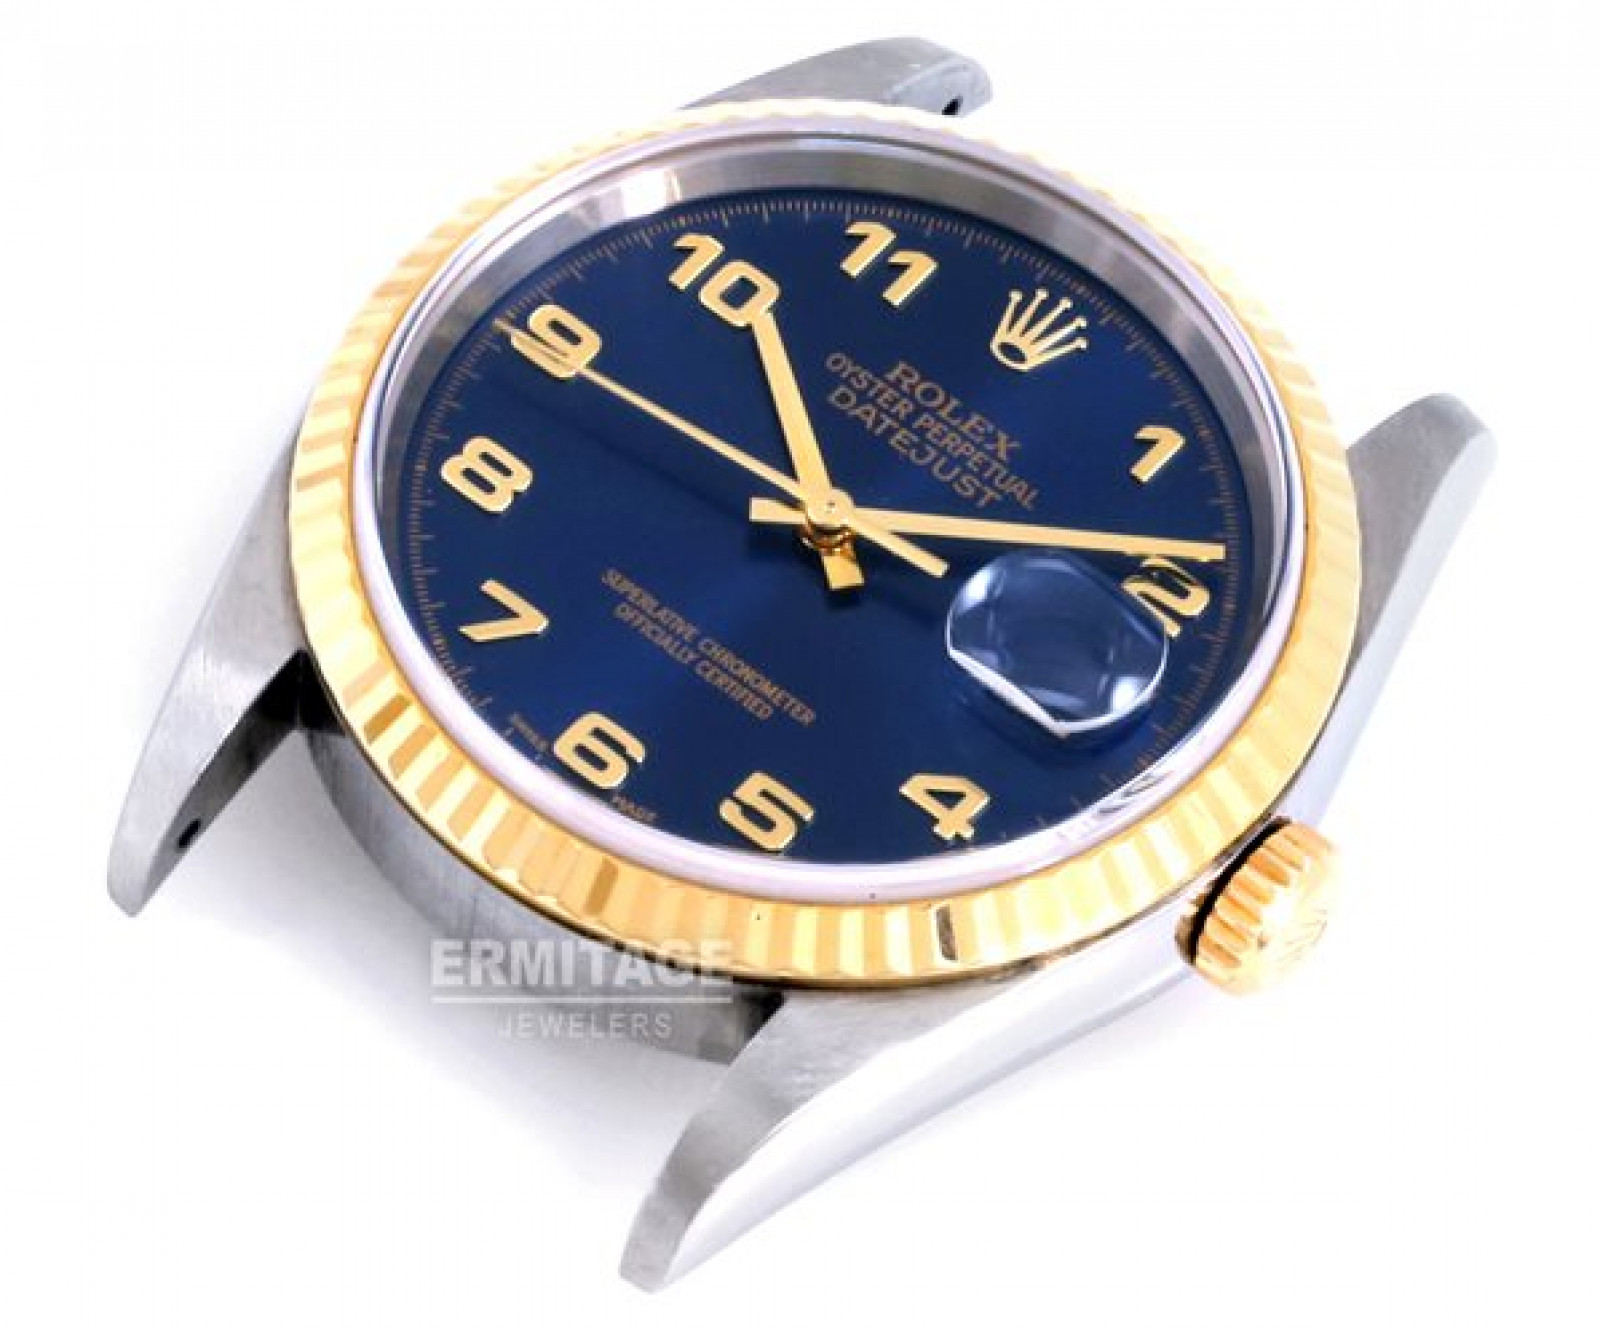 Rolex Datejust 16233 Gold & Steel With Blue Dial